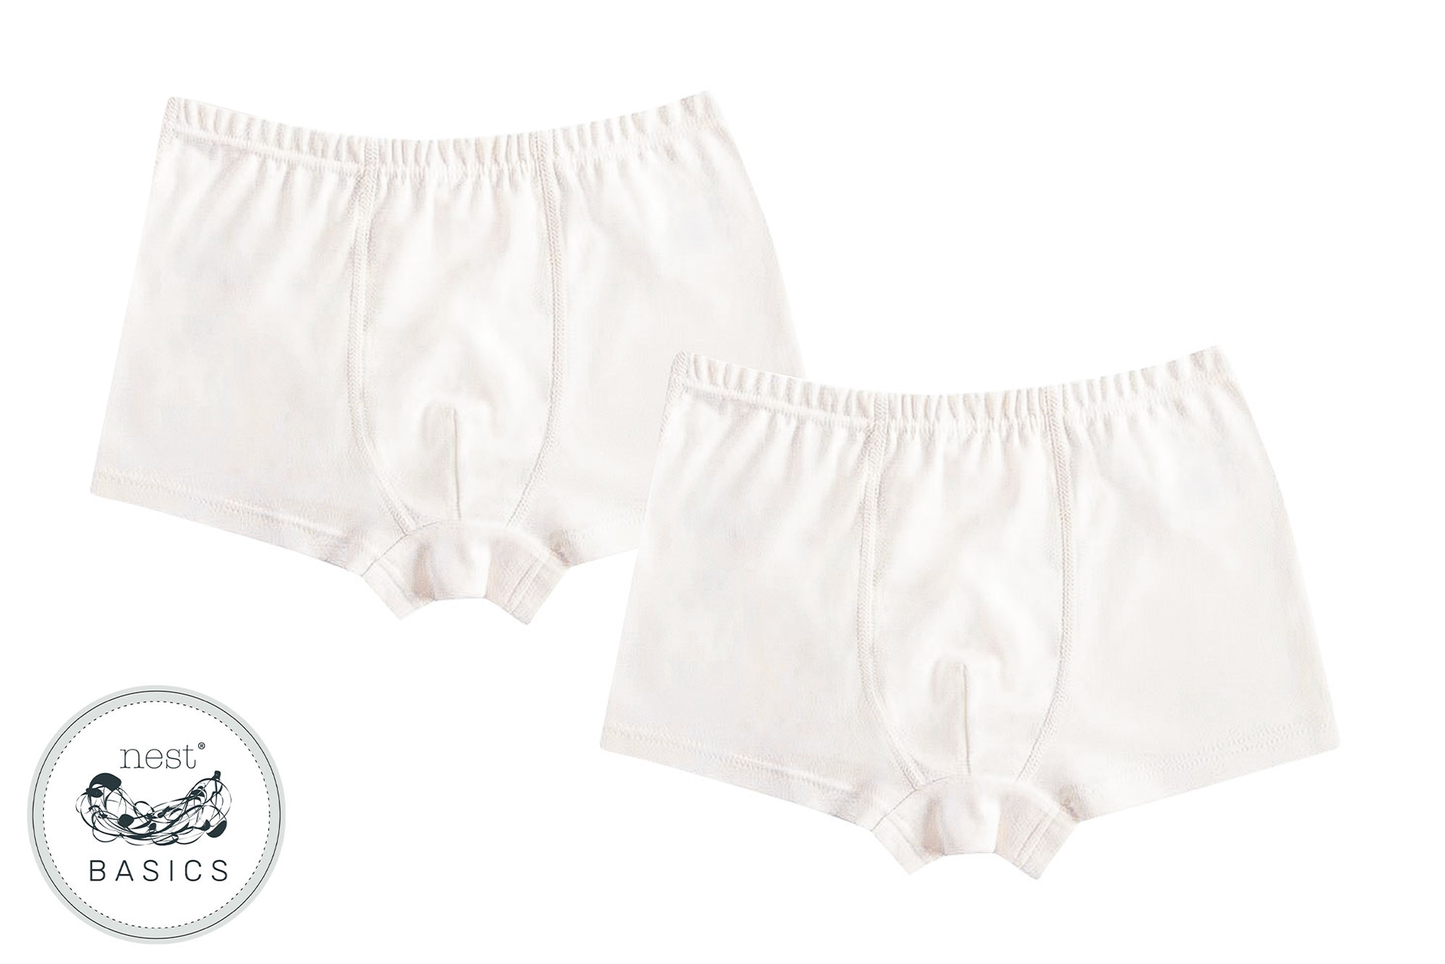 100% Organic Cotton Boys Underwear for 2 to 5 years old